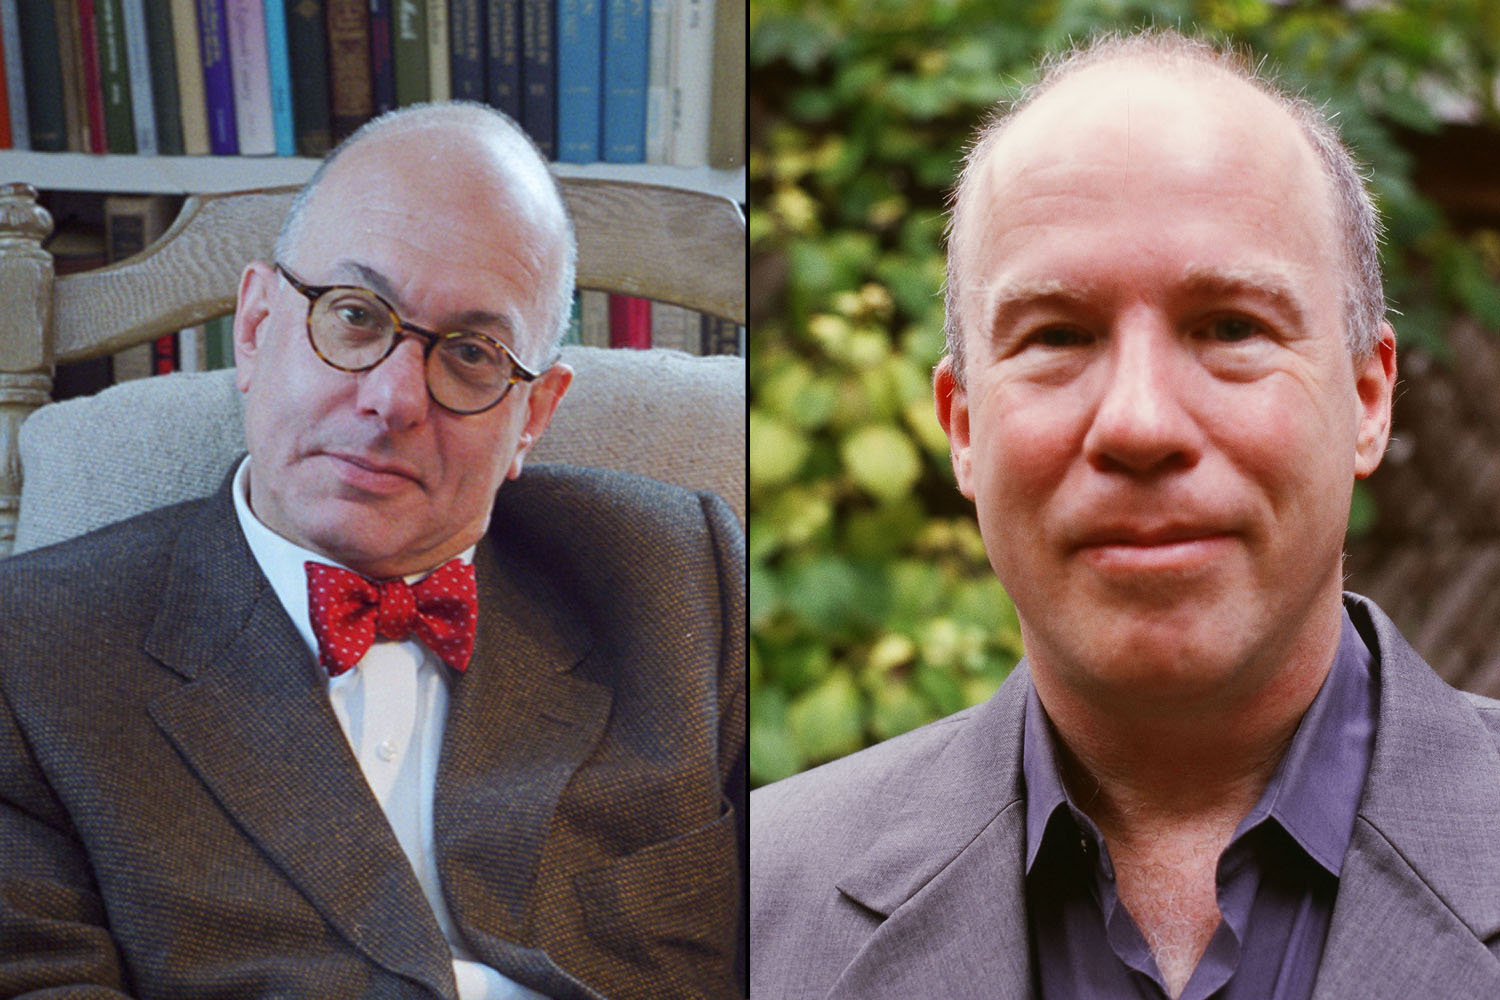 Bard College to Host Postelection Dialogue Friday with Bard President Leon Botstein and Professor and Journalist Mark Danner